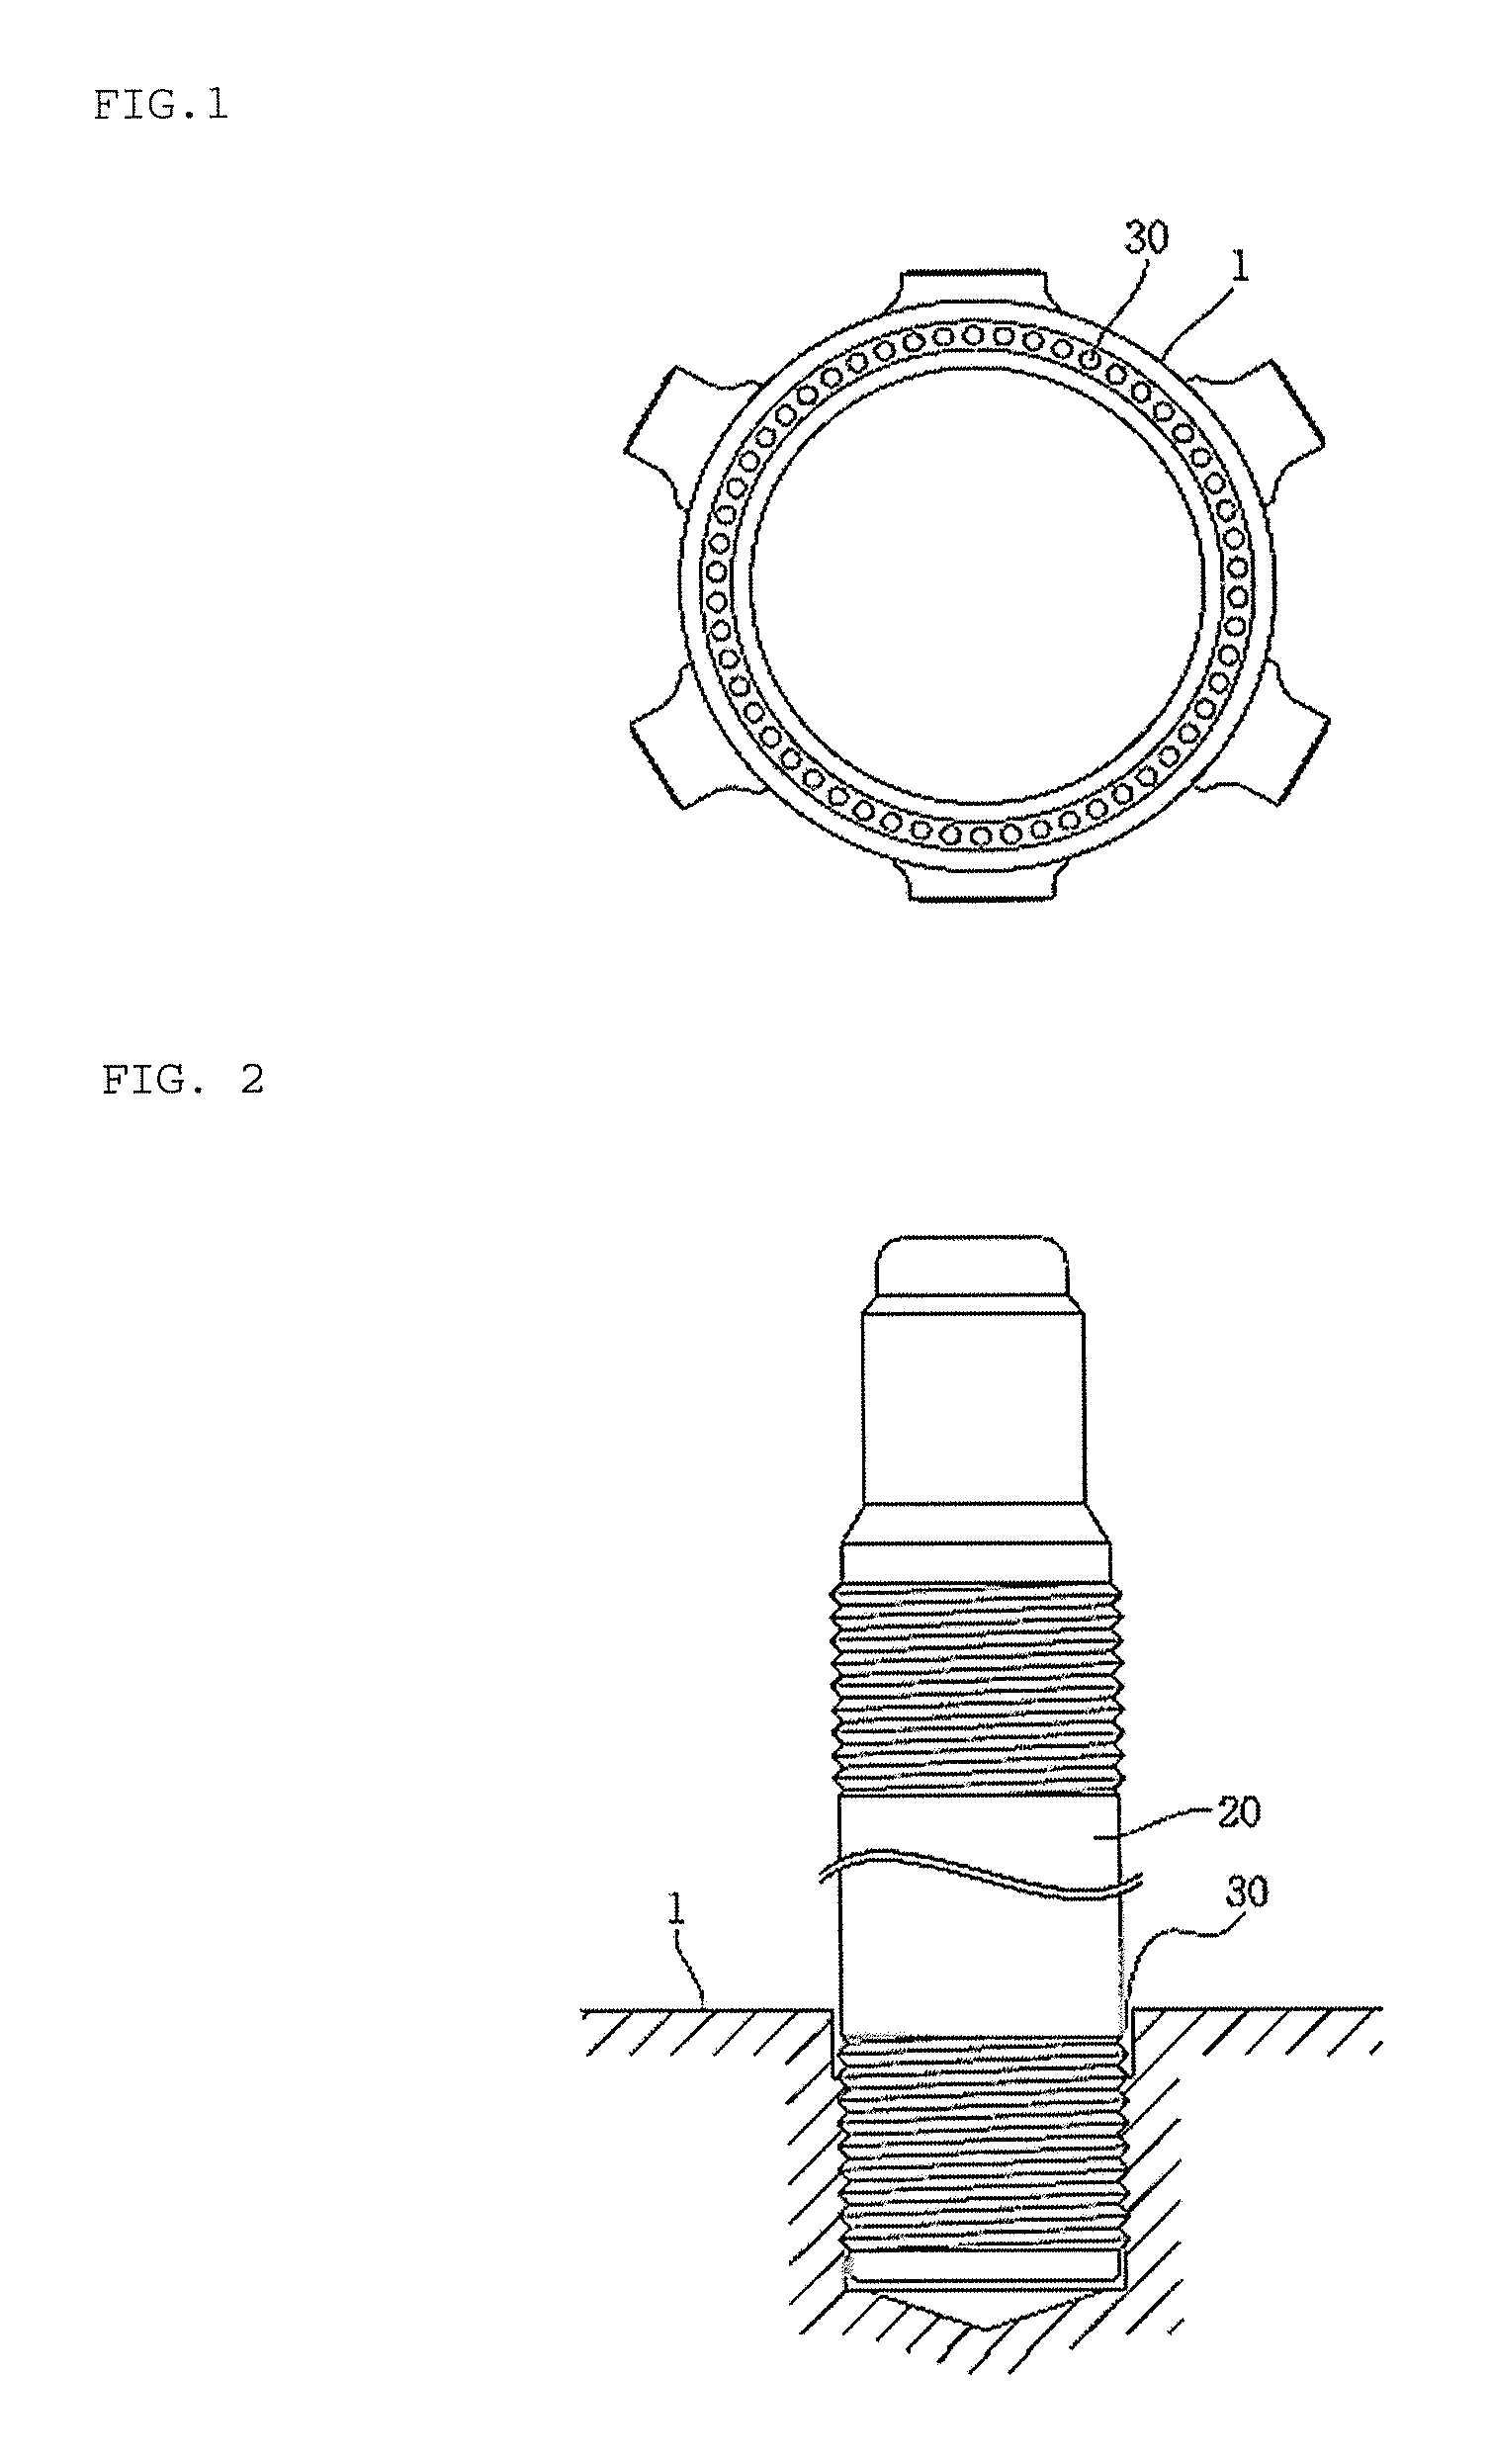 System for automatically cleaning and inspecting stud bolt holes, and managing histories of the stud bolt holes